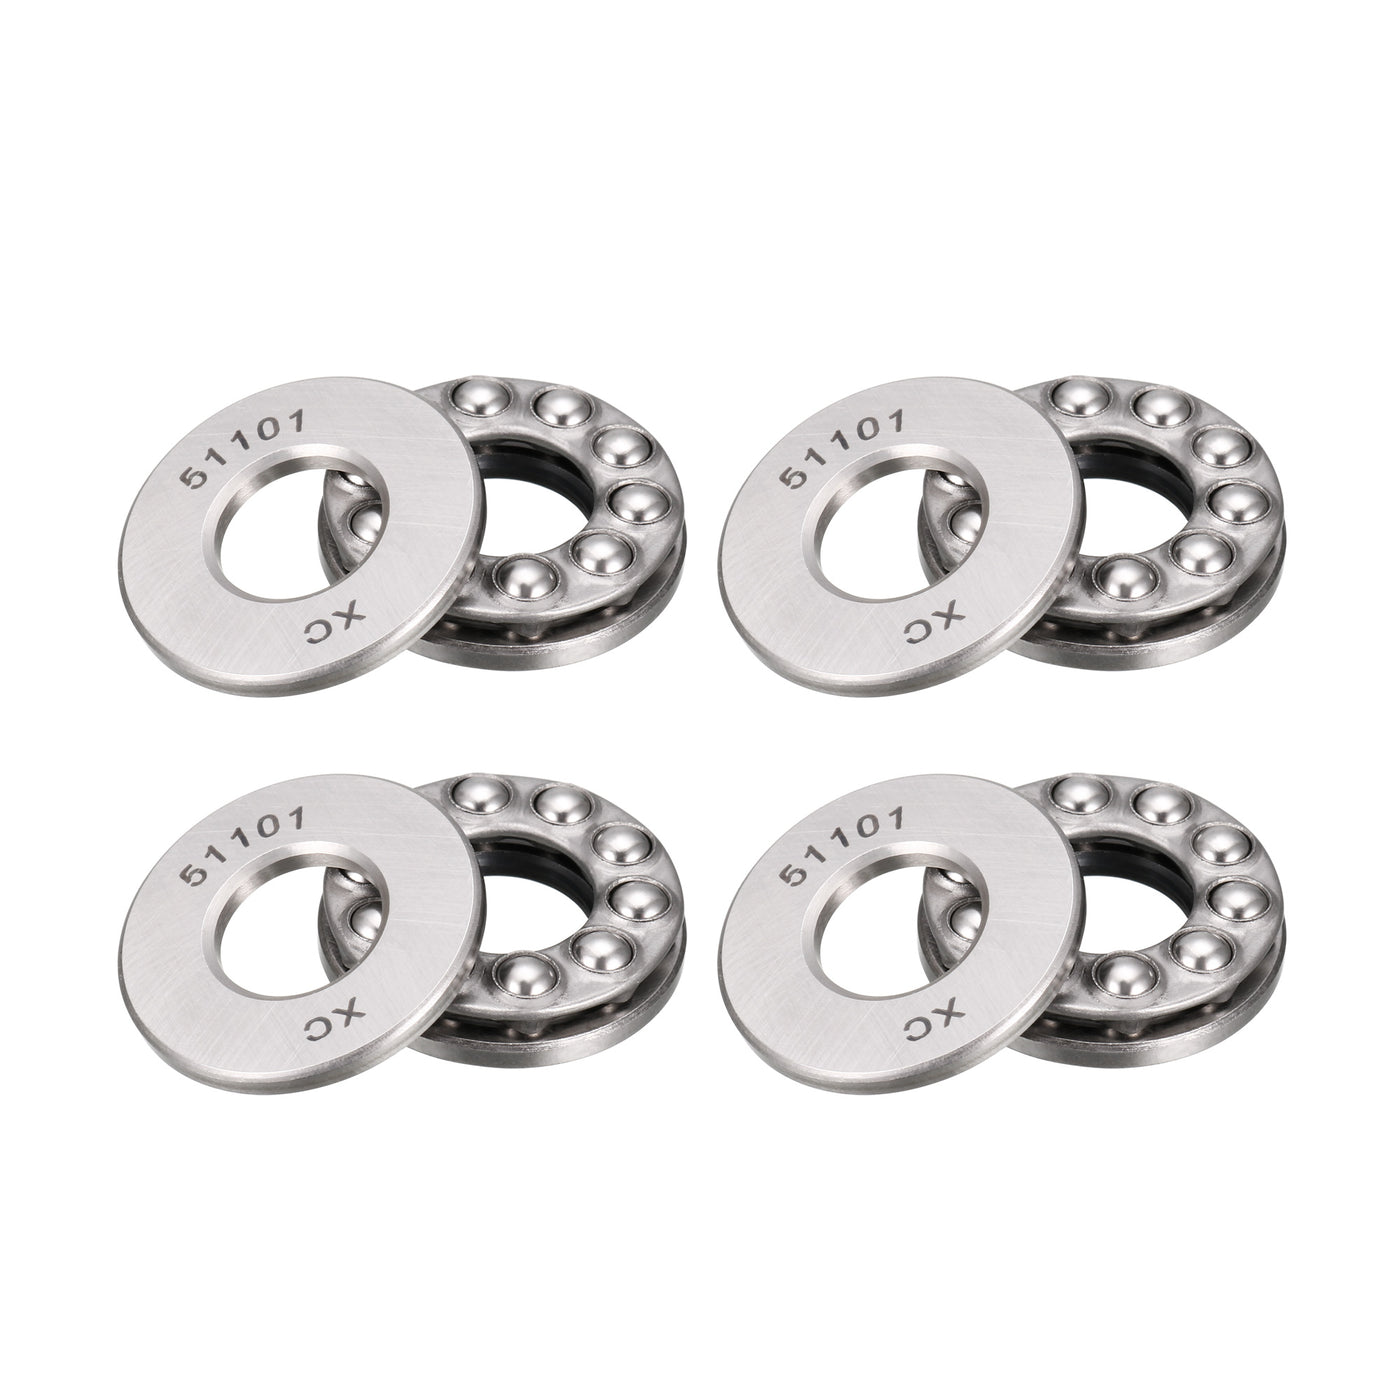 uxcell Uxcell 51101 Miniature Thrust Ball Bearing 12x26x9mm Chrome Steel with Washer 4pcs